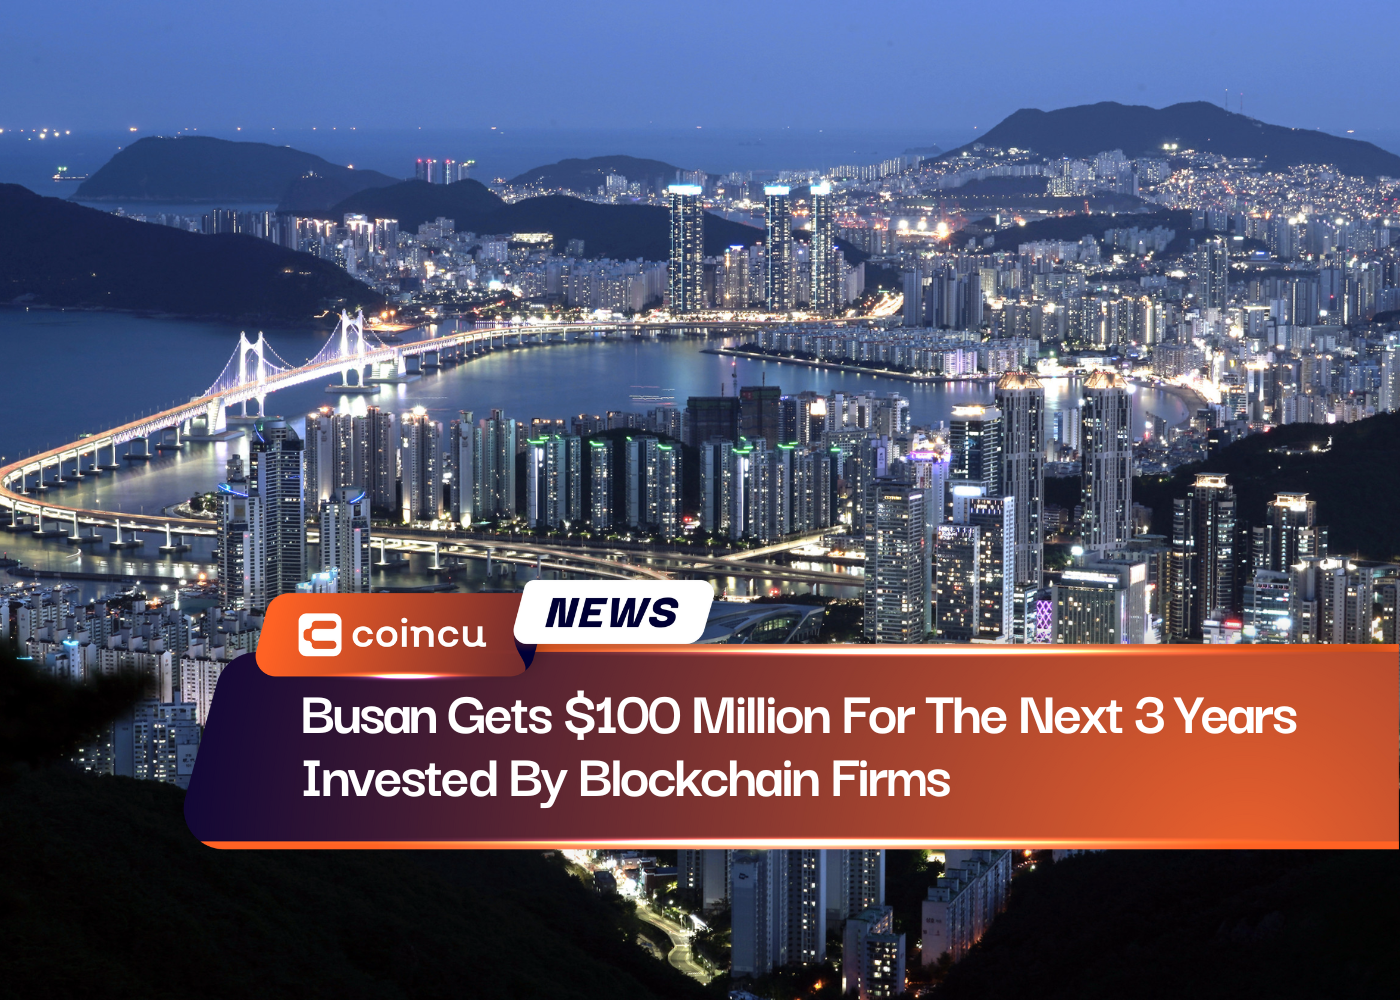 Busan Gets $100 Million For The Next 3 Years Invested By Blockchain Firms